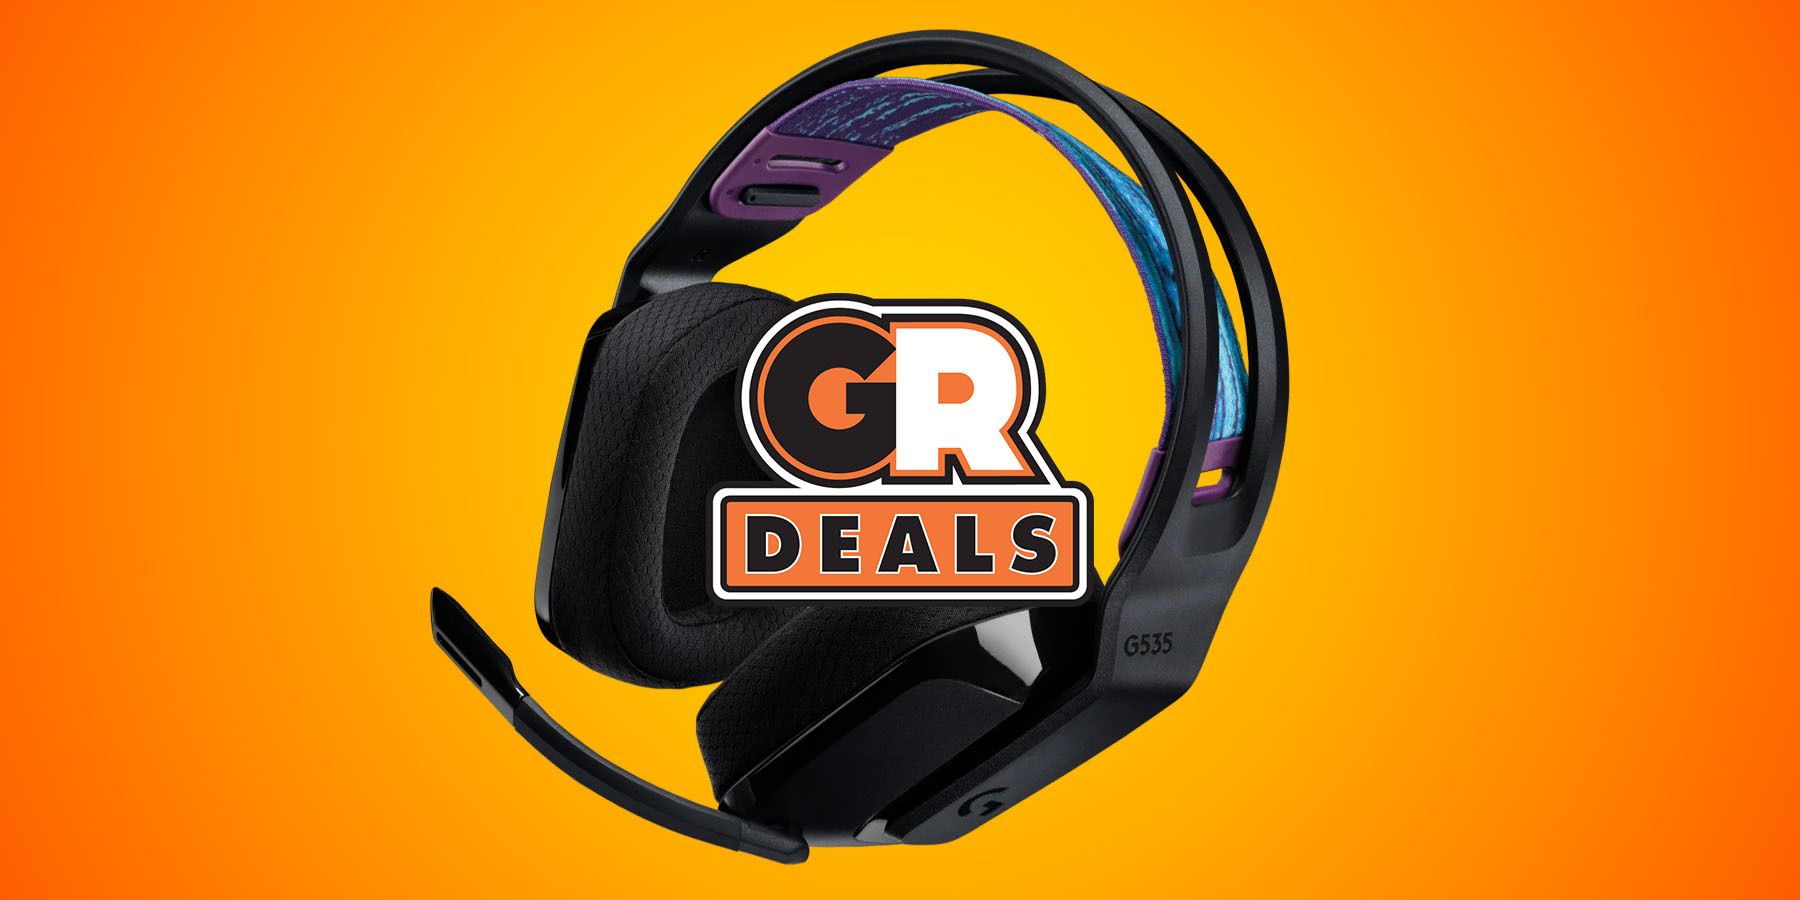 The Logitech G535 Lightspeed Gaming Headset is $99.99 for a Limited Time